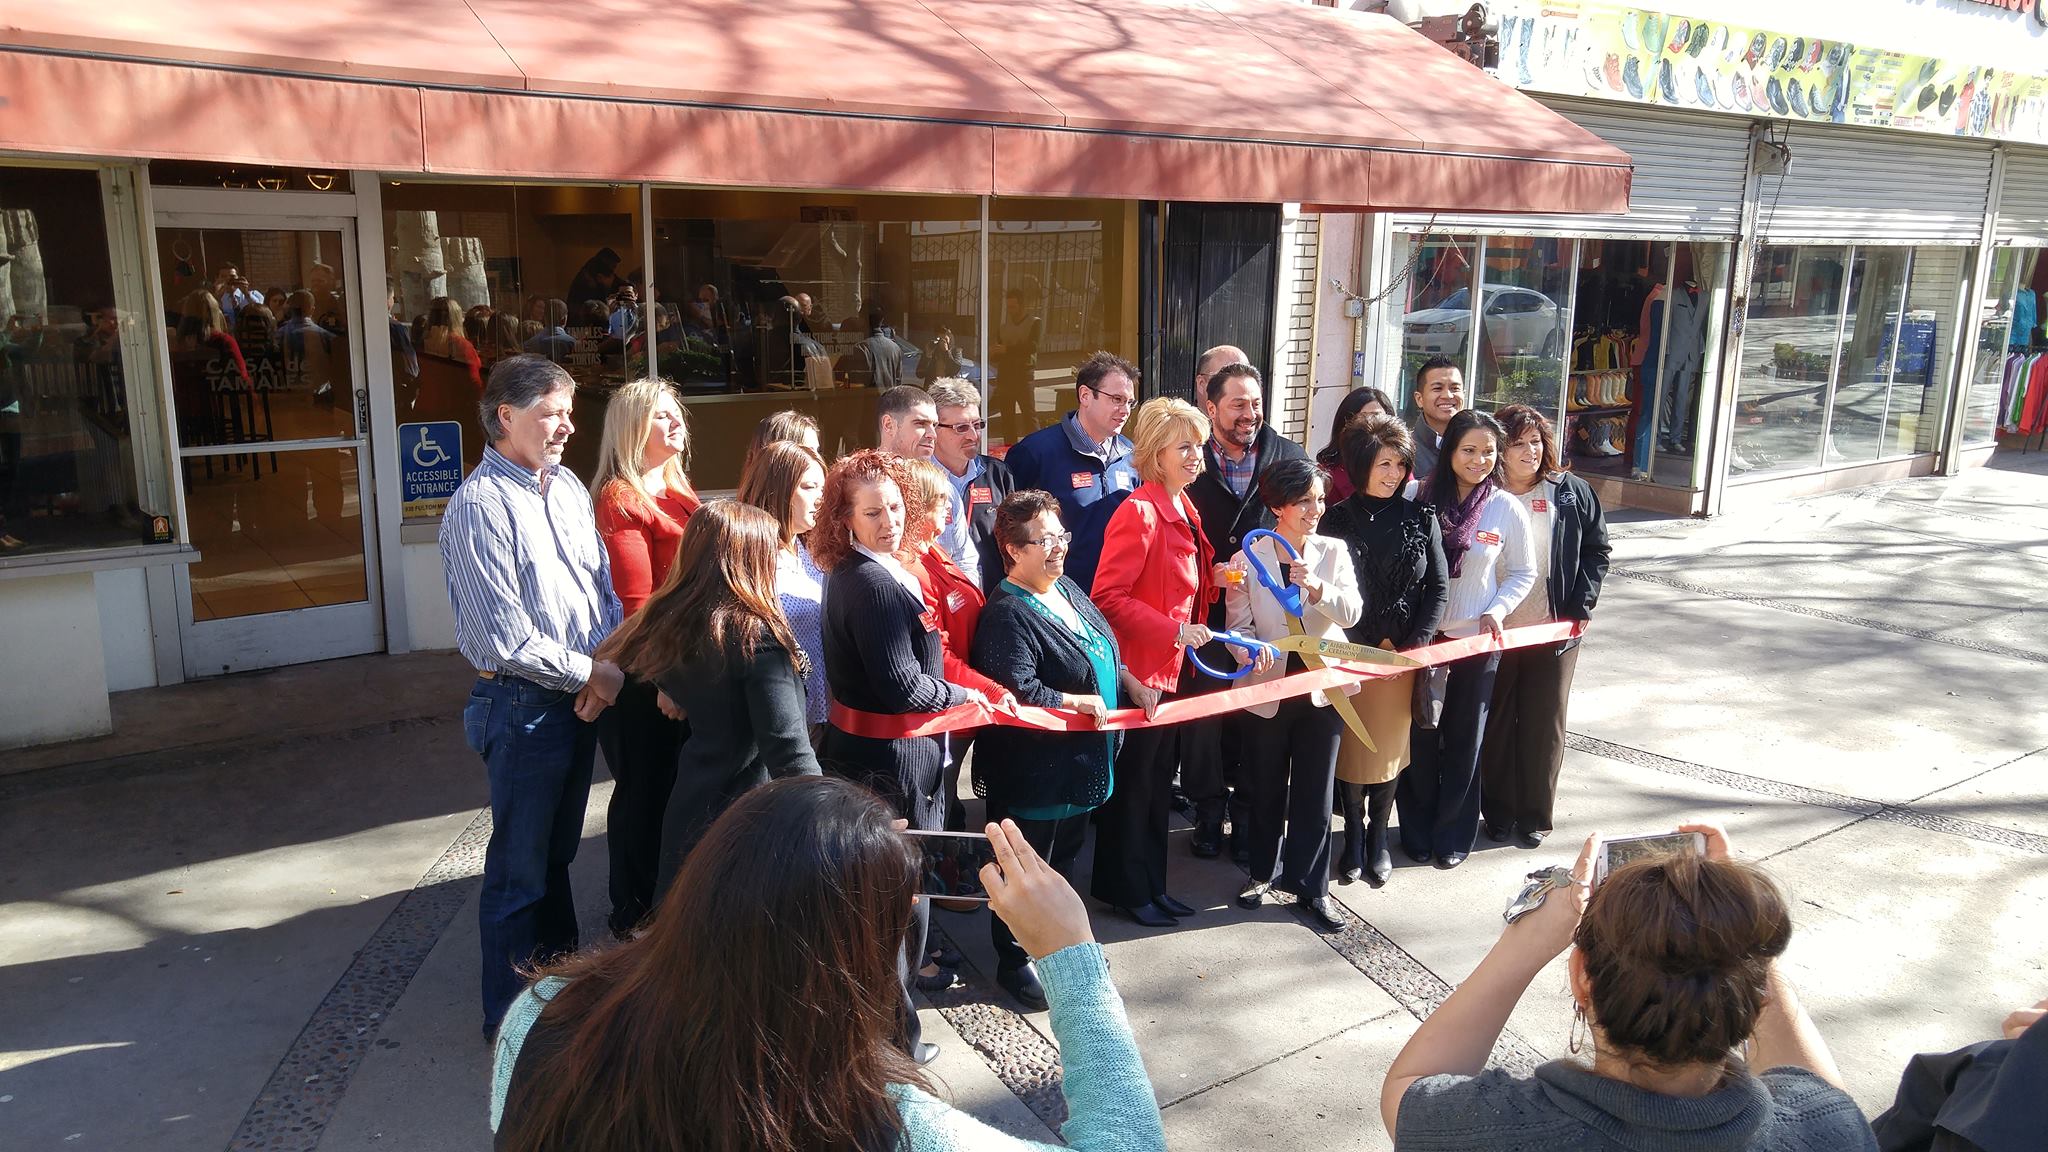 Mayor Swearengin and Liz Sanchez cut the ribbon to officially open the Casa de Tamales Fulton Mall location on February 1st